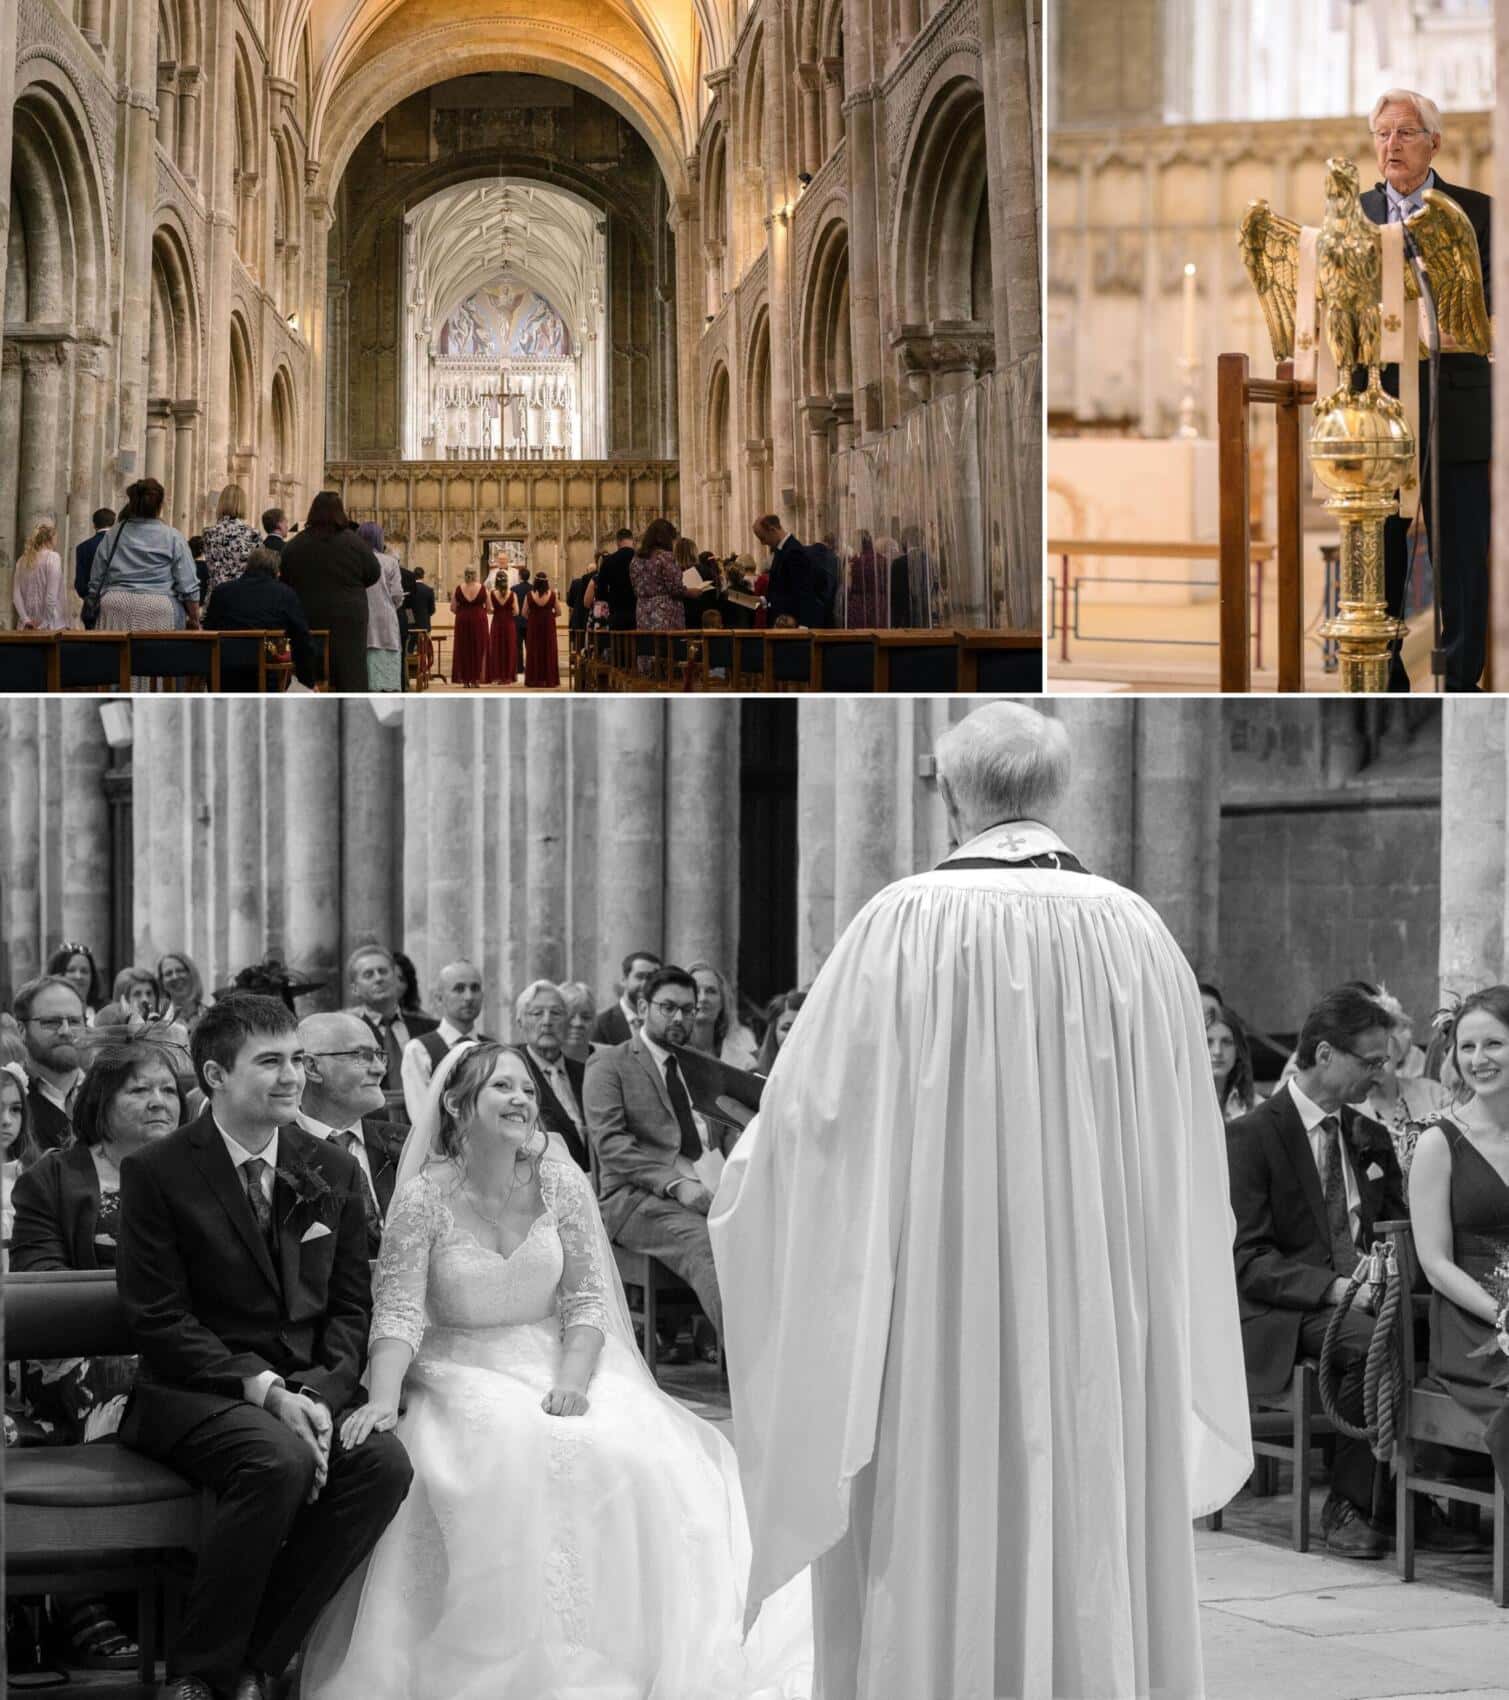 Father Charles at Christchurch Priory wedding ceremony